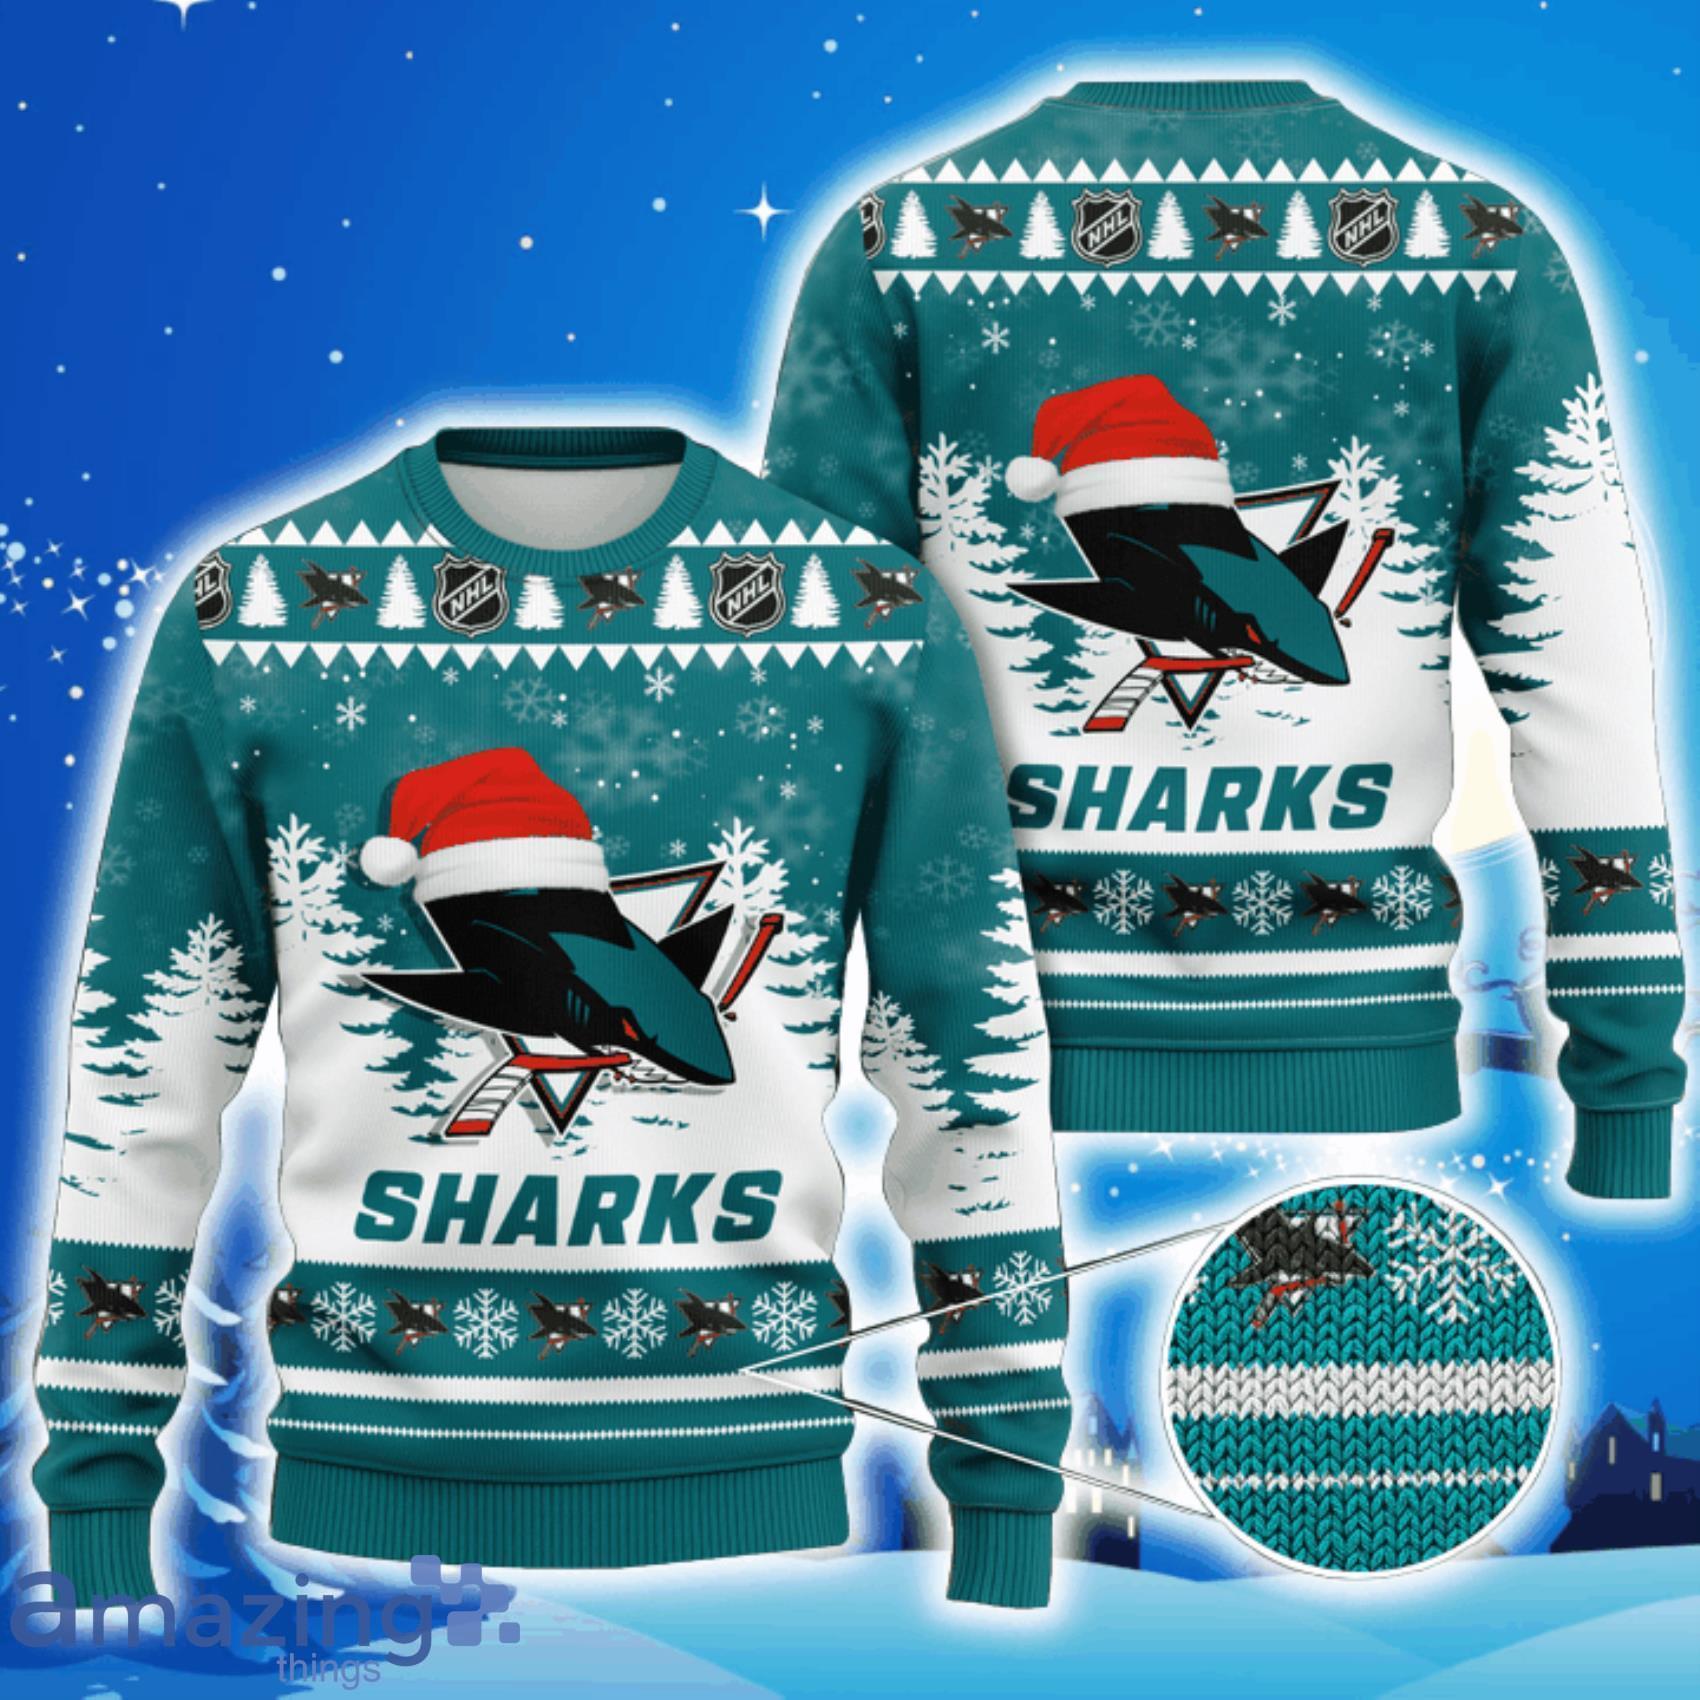 San Jose Sharks - Holiday sweater  holiday sweater  Time for you to  get your #SJSharks holiday sweater. Get yours exclusively at  www.sjteamshop.com/collections/the-holidays